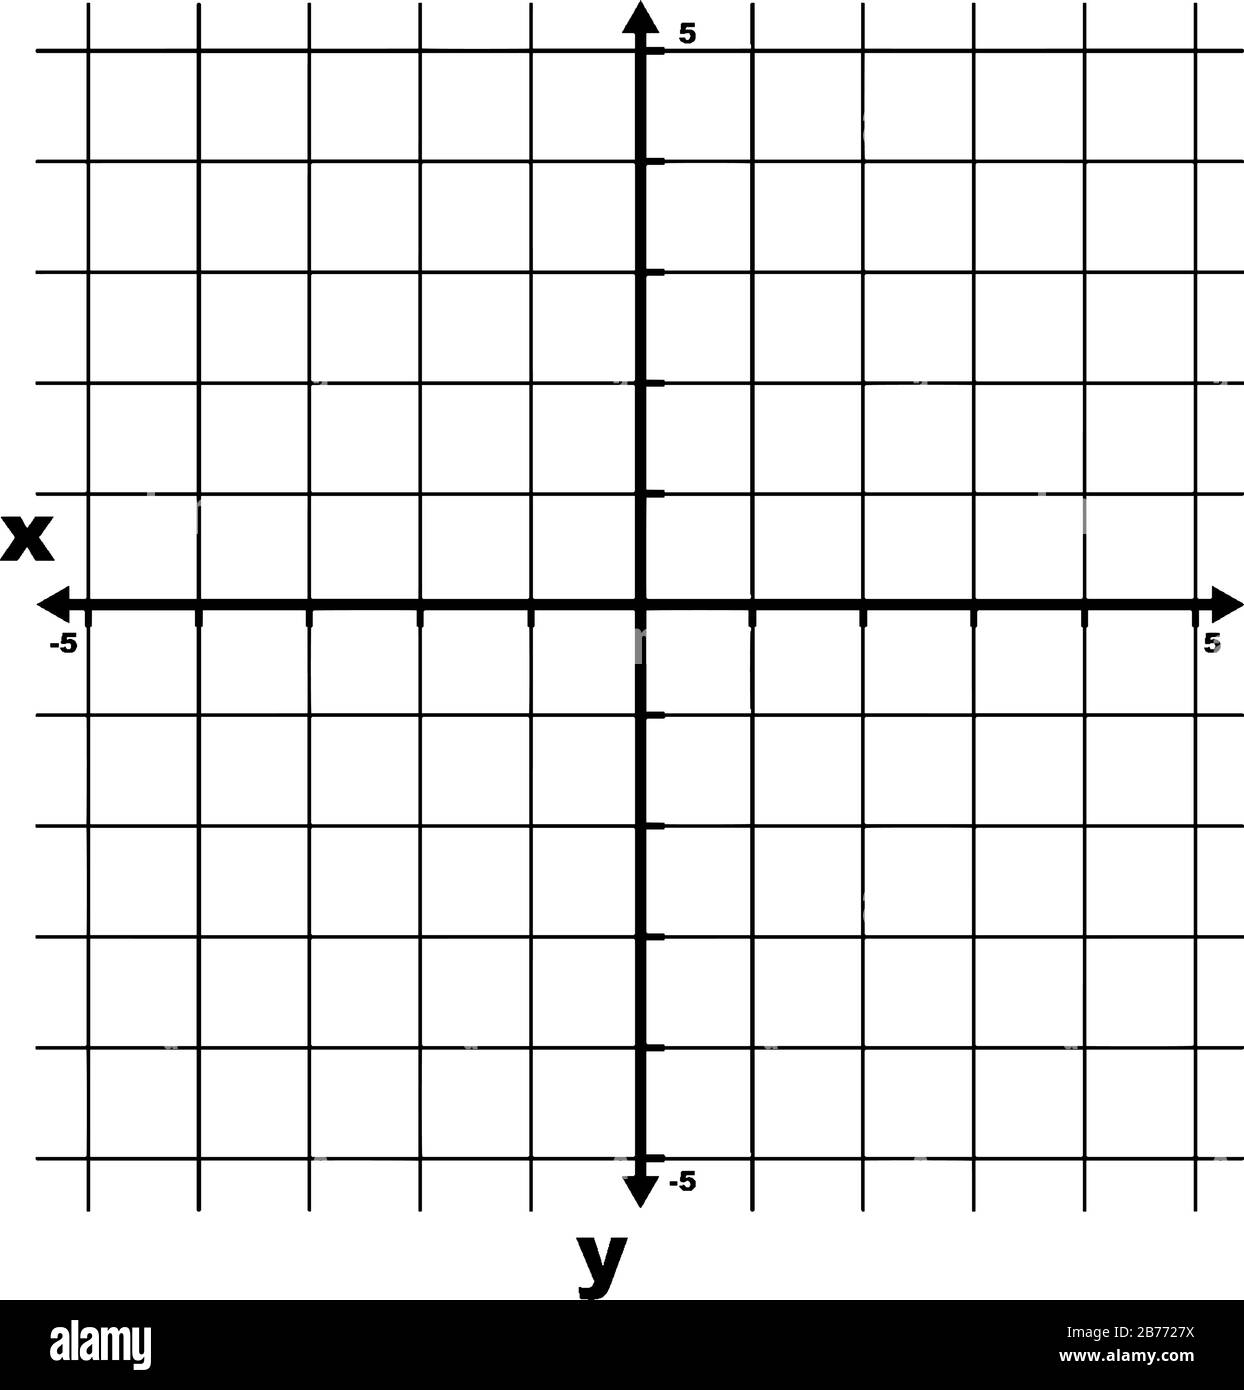 An xy grid/graph with grid lines are shown. It is the Cartesian coordinate system with the axes and some increments from -5 to 5 labelled, vintage lin Stock Vector